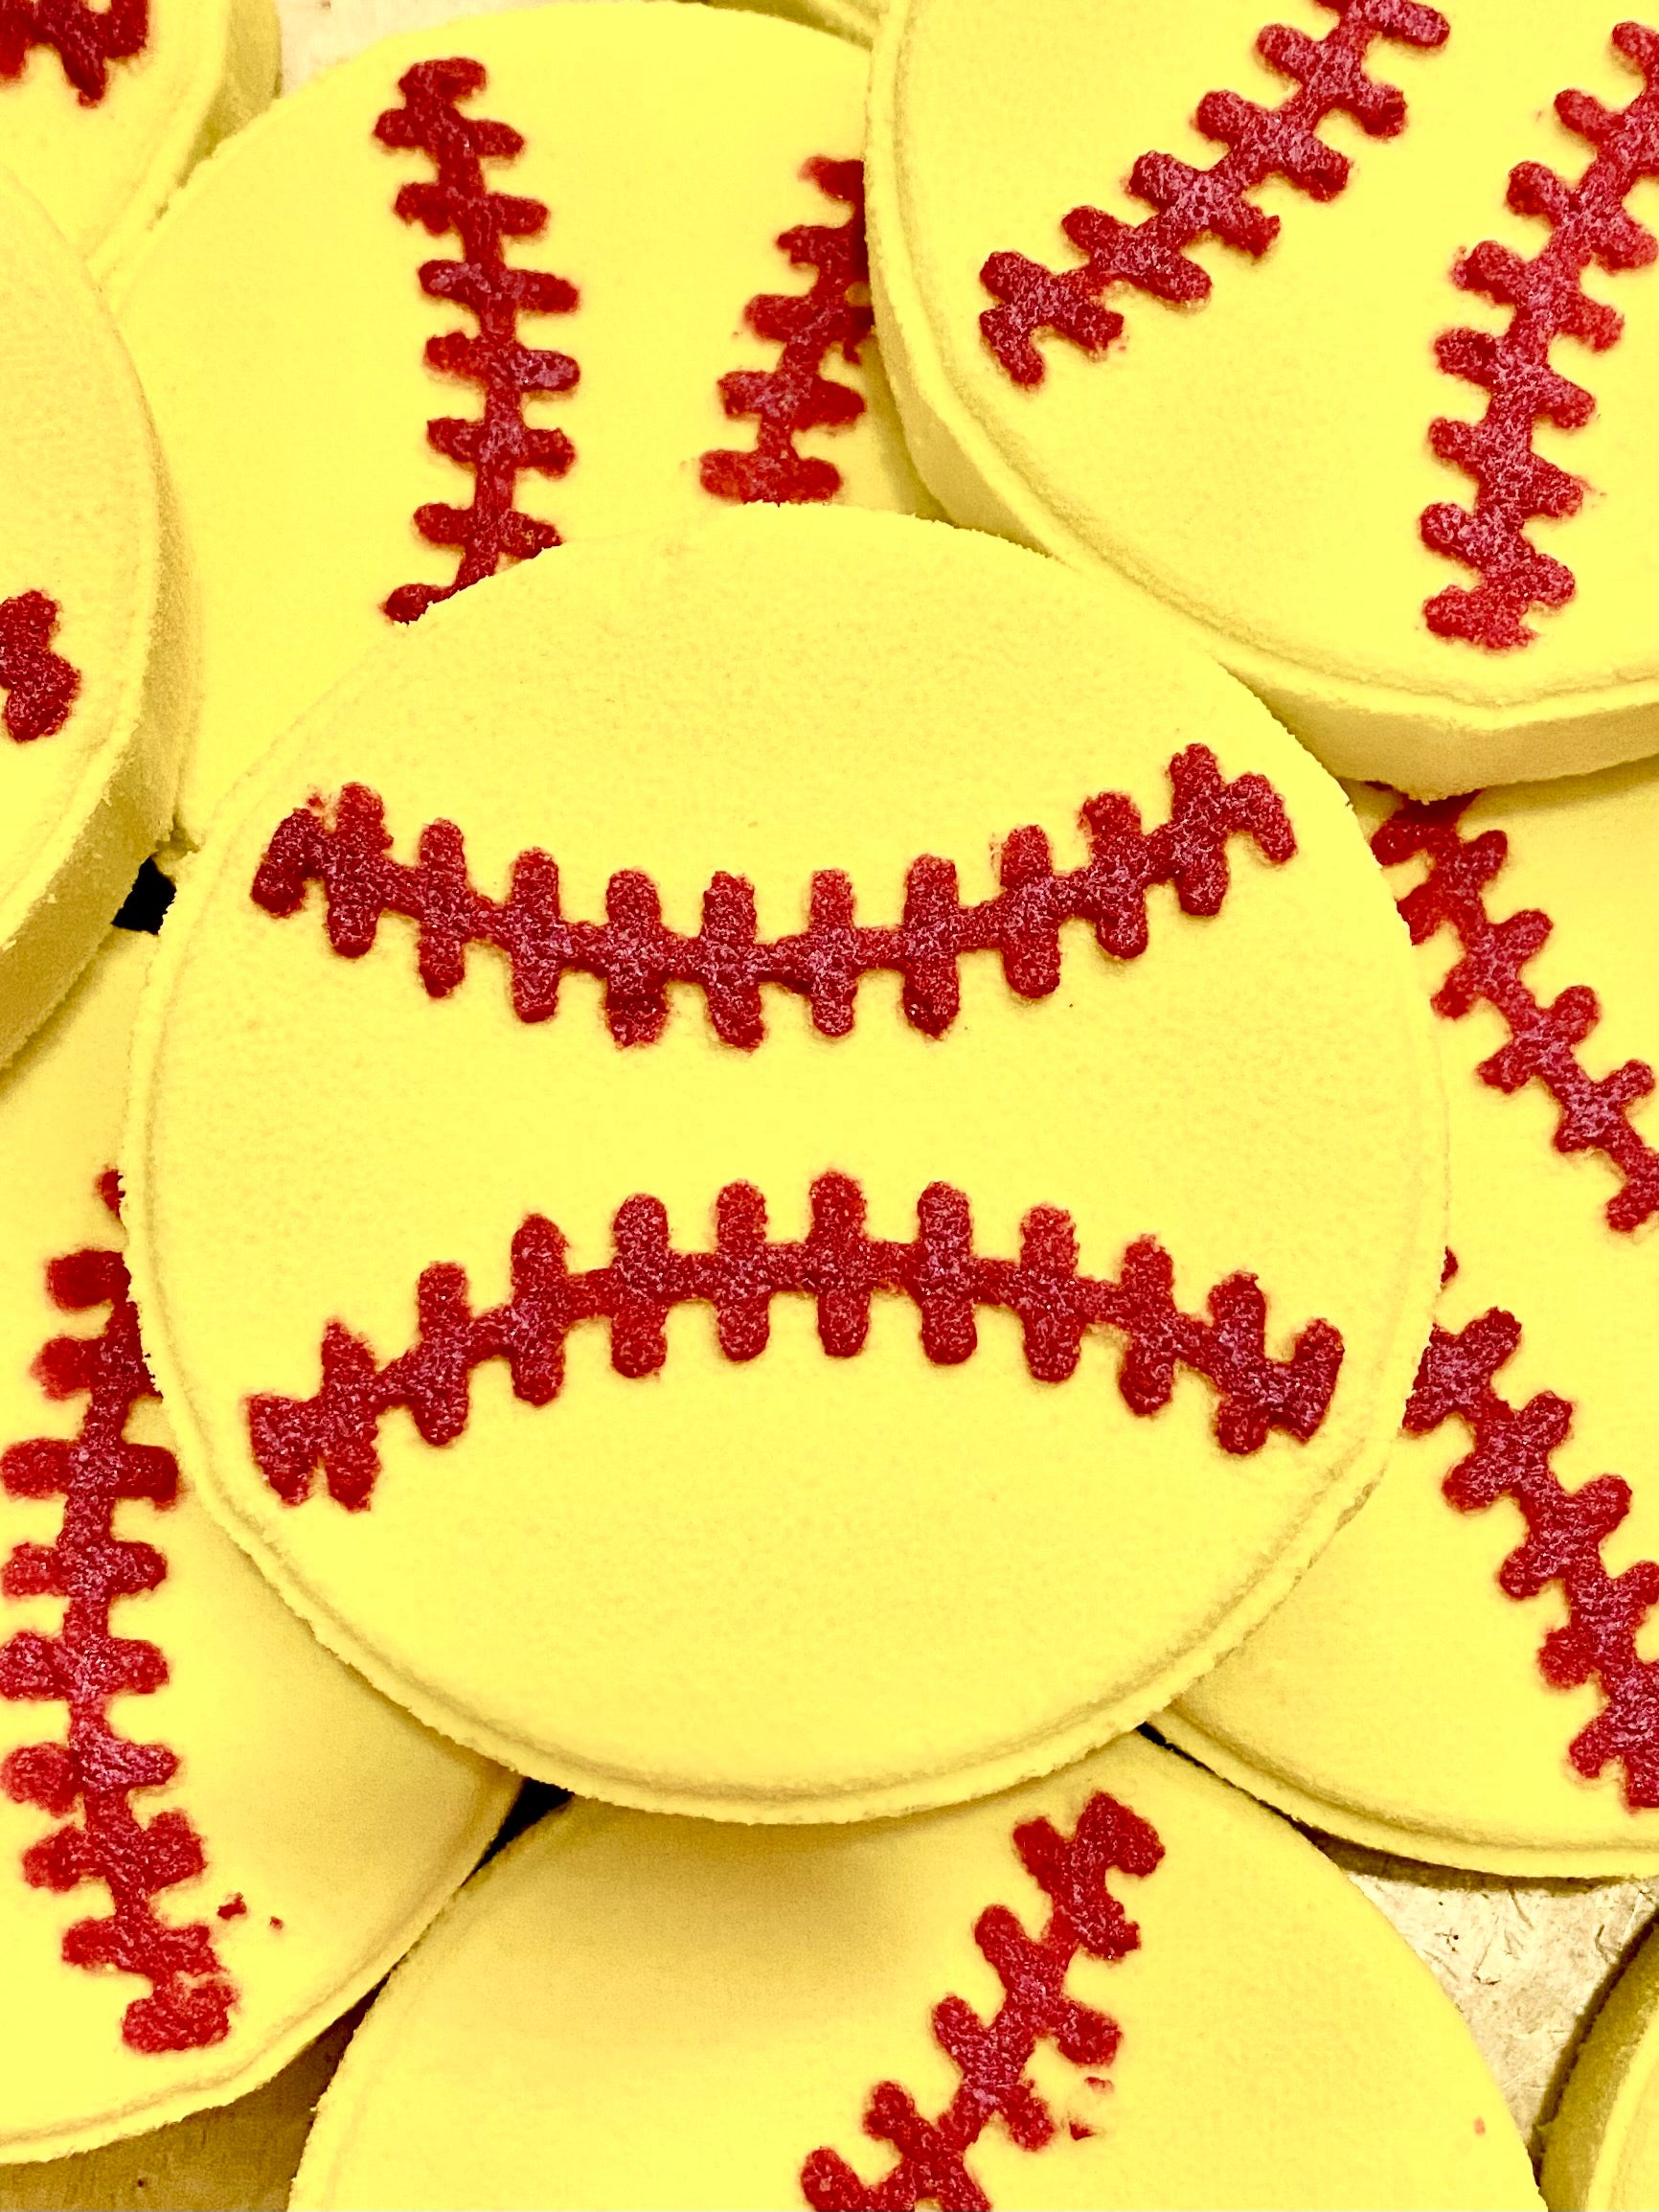 Softball Bath Bomb with Jersey Number